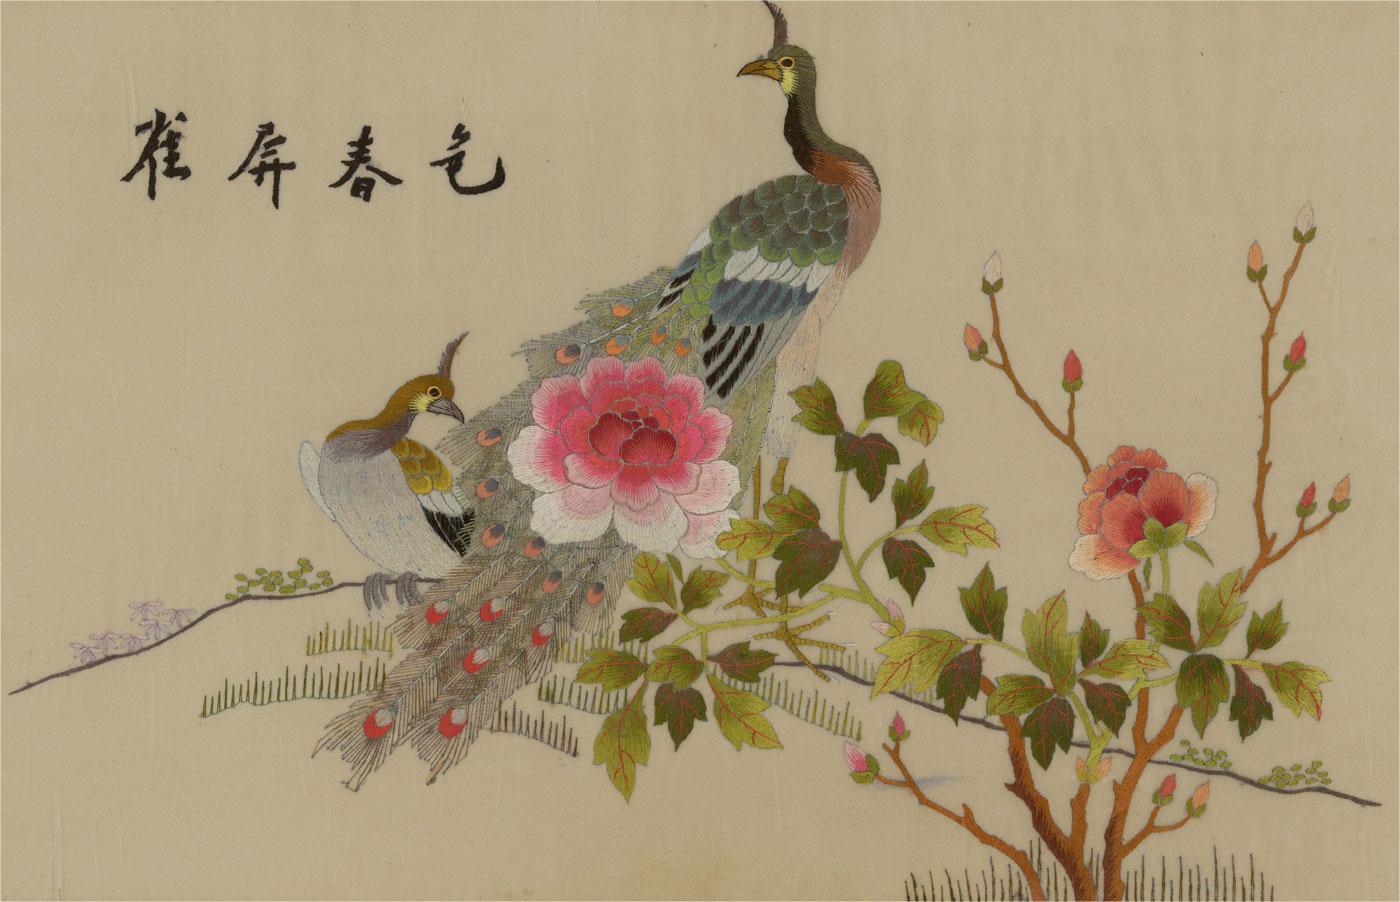 An exquisite 20th Century embroidery using the most beautiful silk threads. The colours of the threads a wonderfully bright and the flat, directional stitches give the embroidery movement and a bright shimmer. There are hand embroidered kanji in the